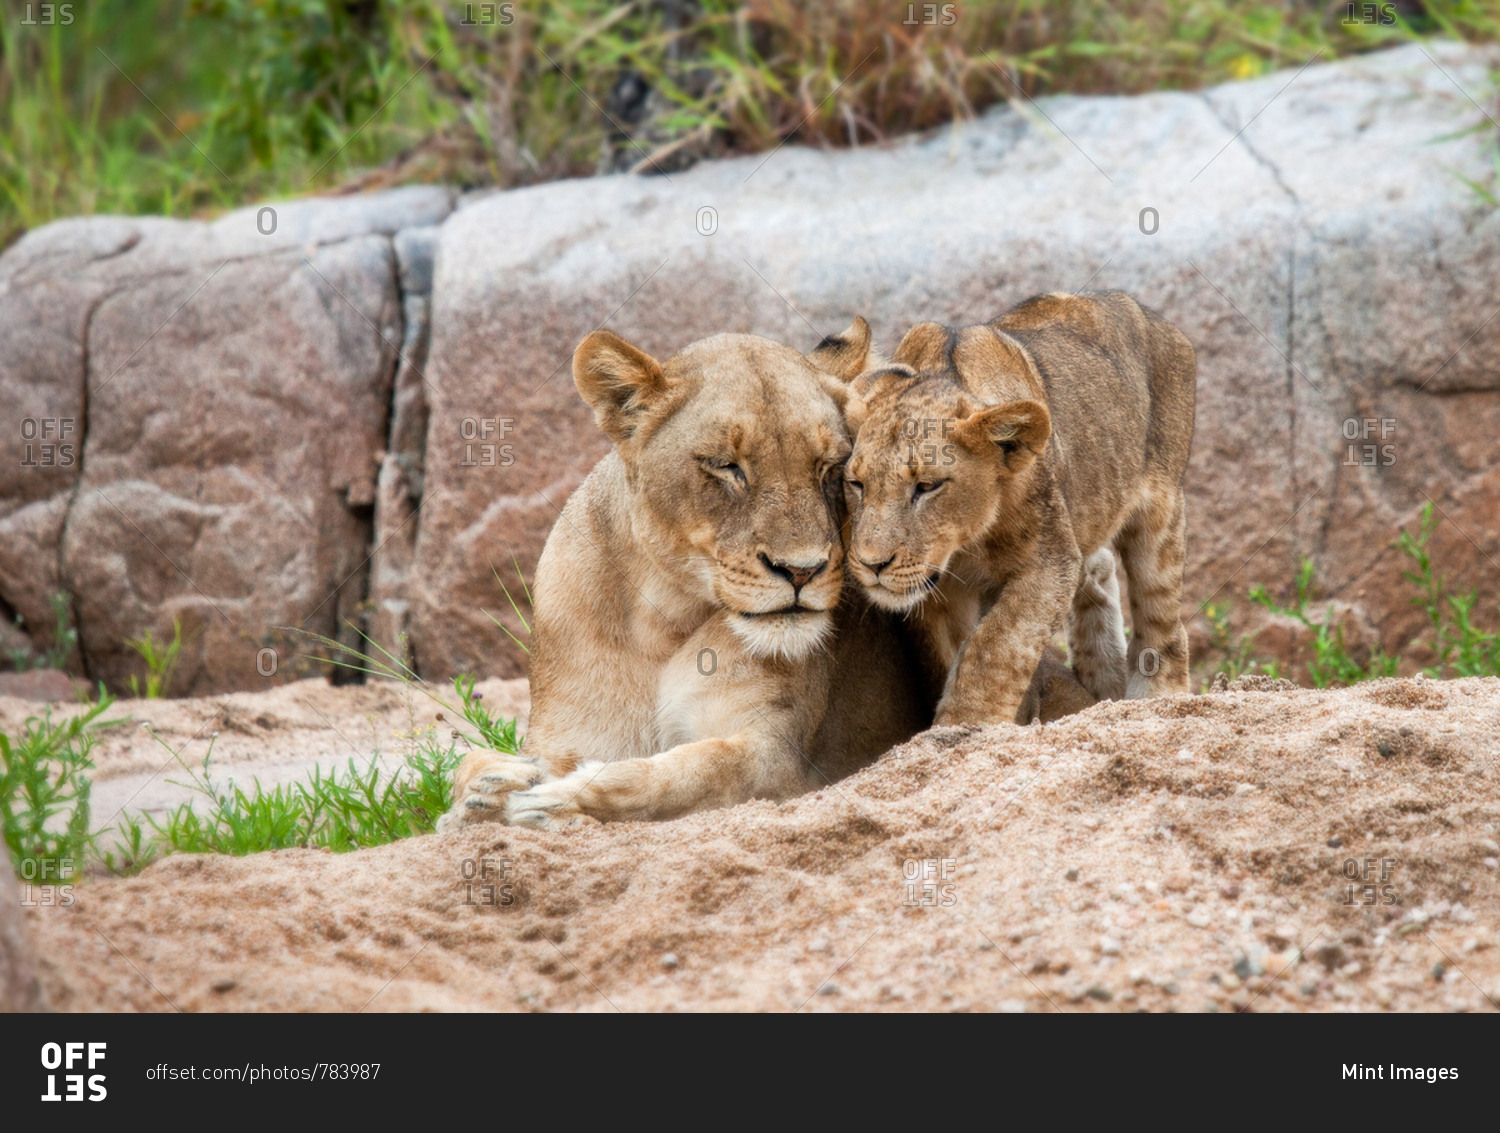 A lion cub, Panthera leo, stands beside its mother who lies on the sand, eyes closed, touch heads, boulder in the background